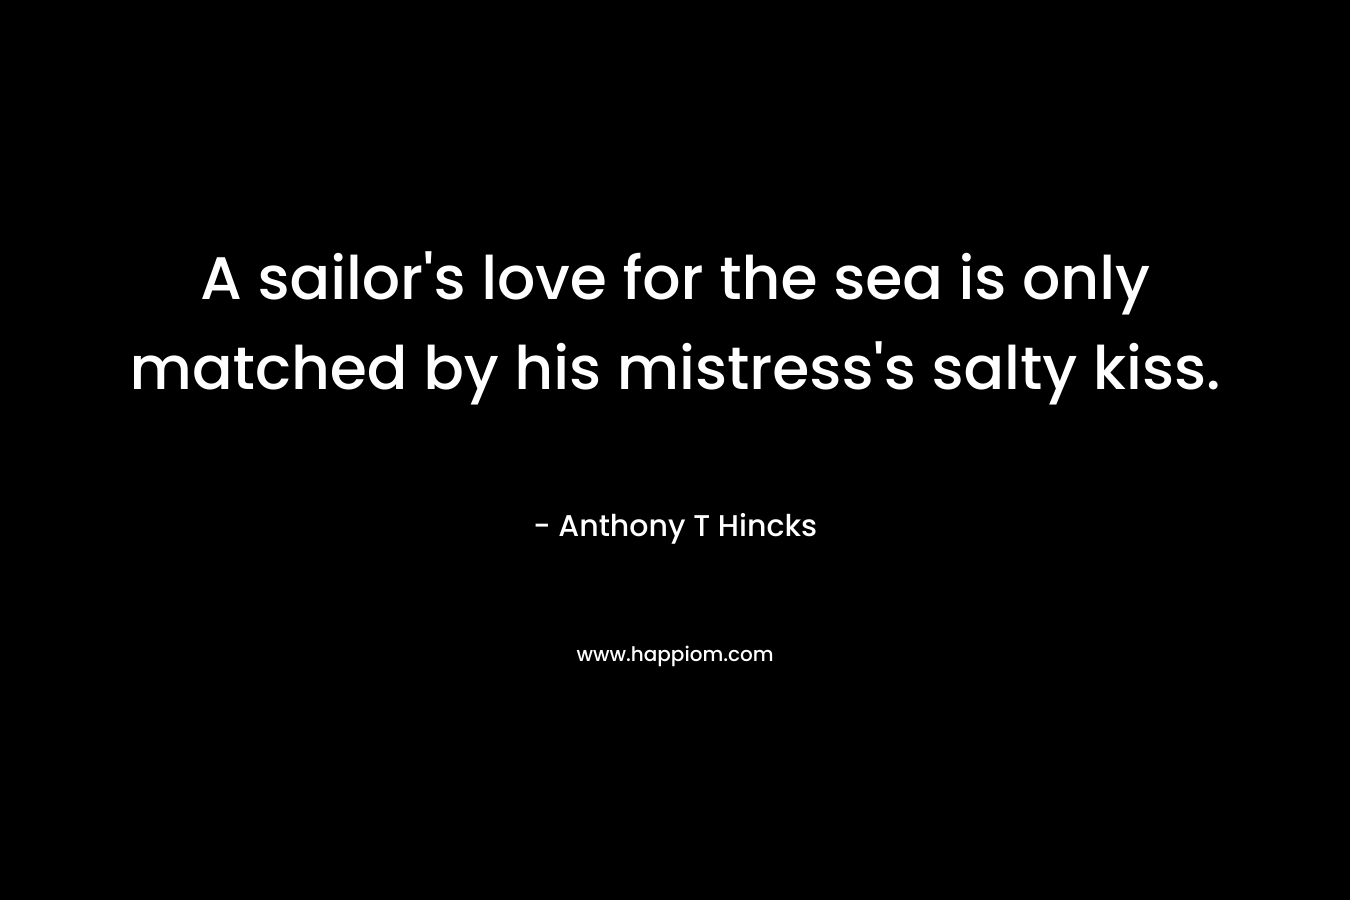 A sailor’s love for the sea is only matched by his mistress’s salty kiss. – Anthony T Hincks